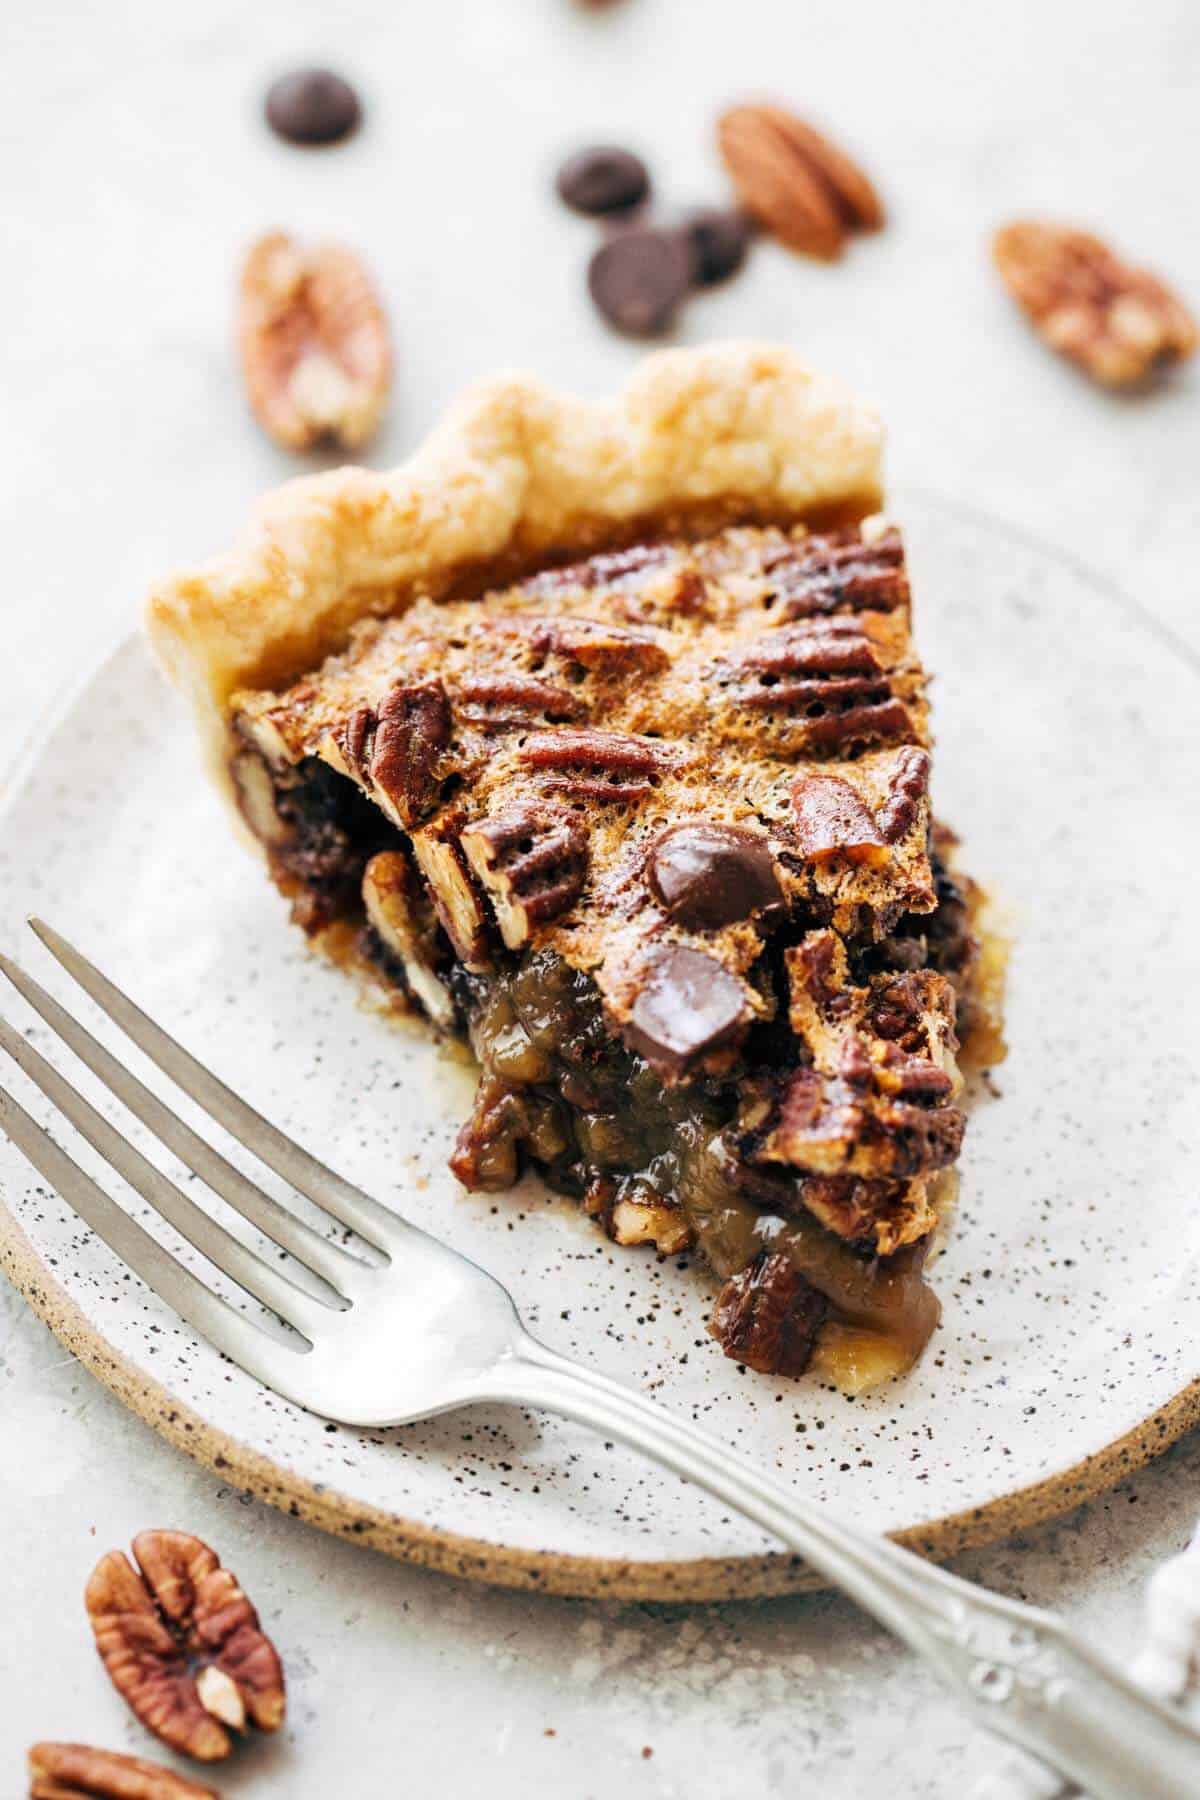 Slice of chocolate pecan pie with a fork on a white plate.